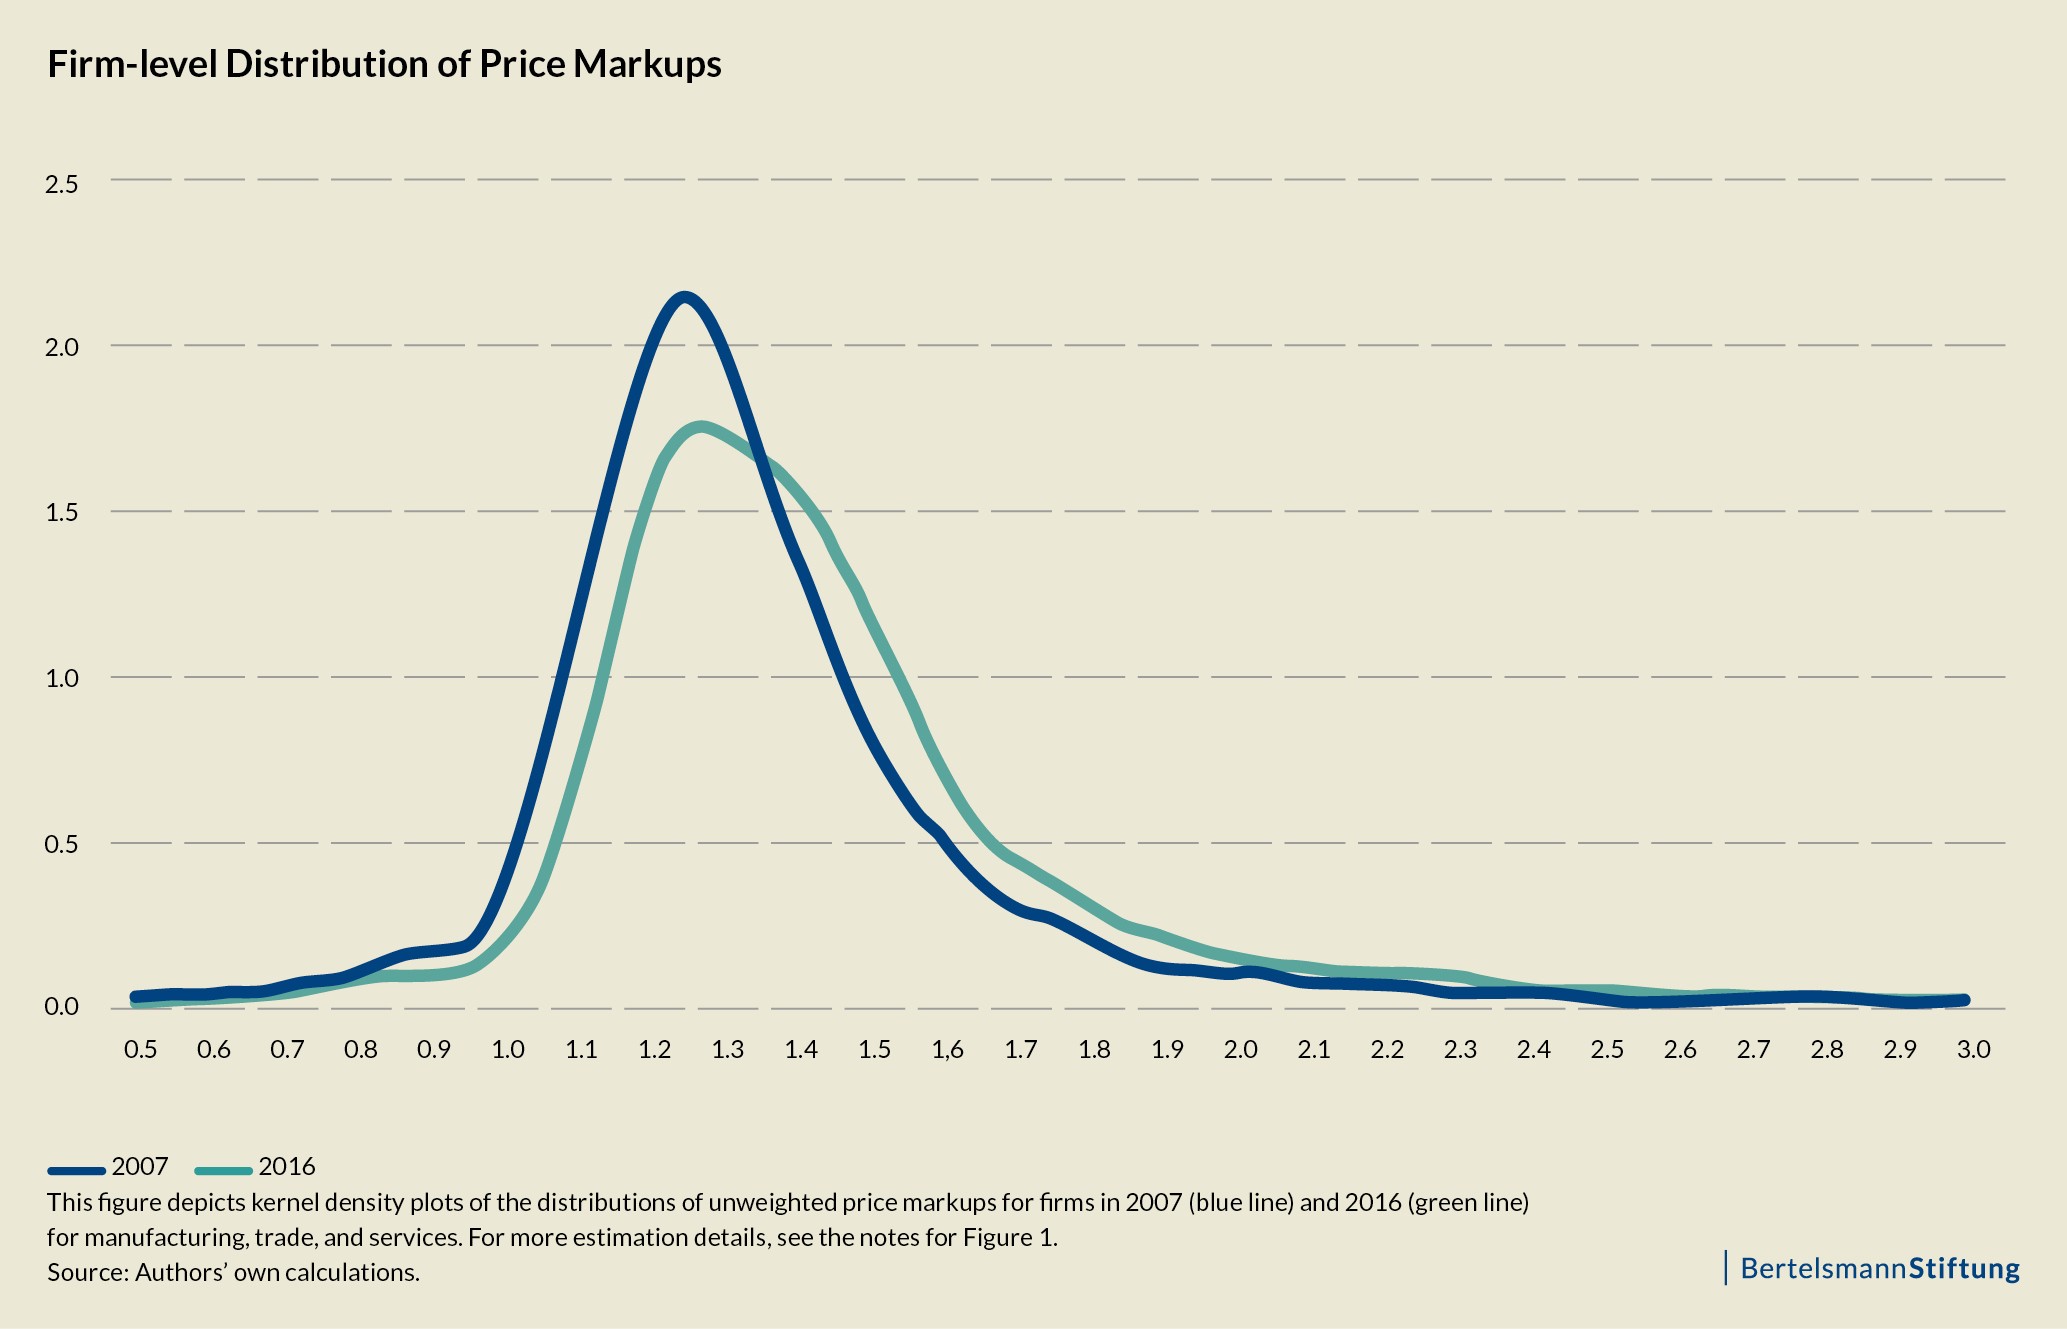 Firm-level distribution of price markups